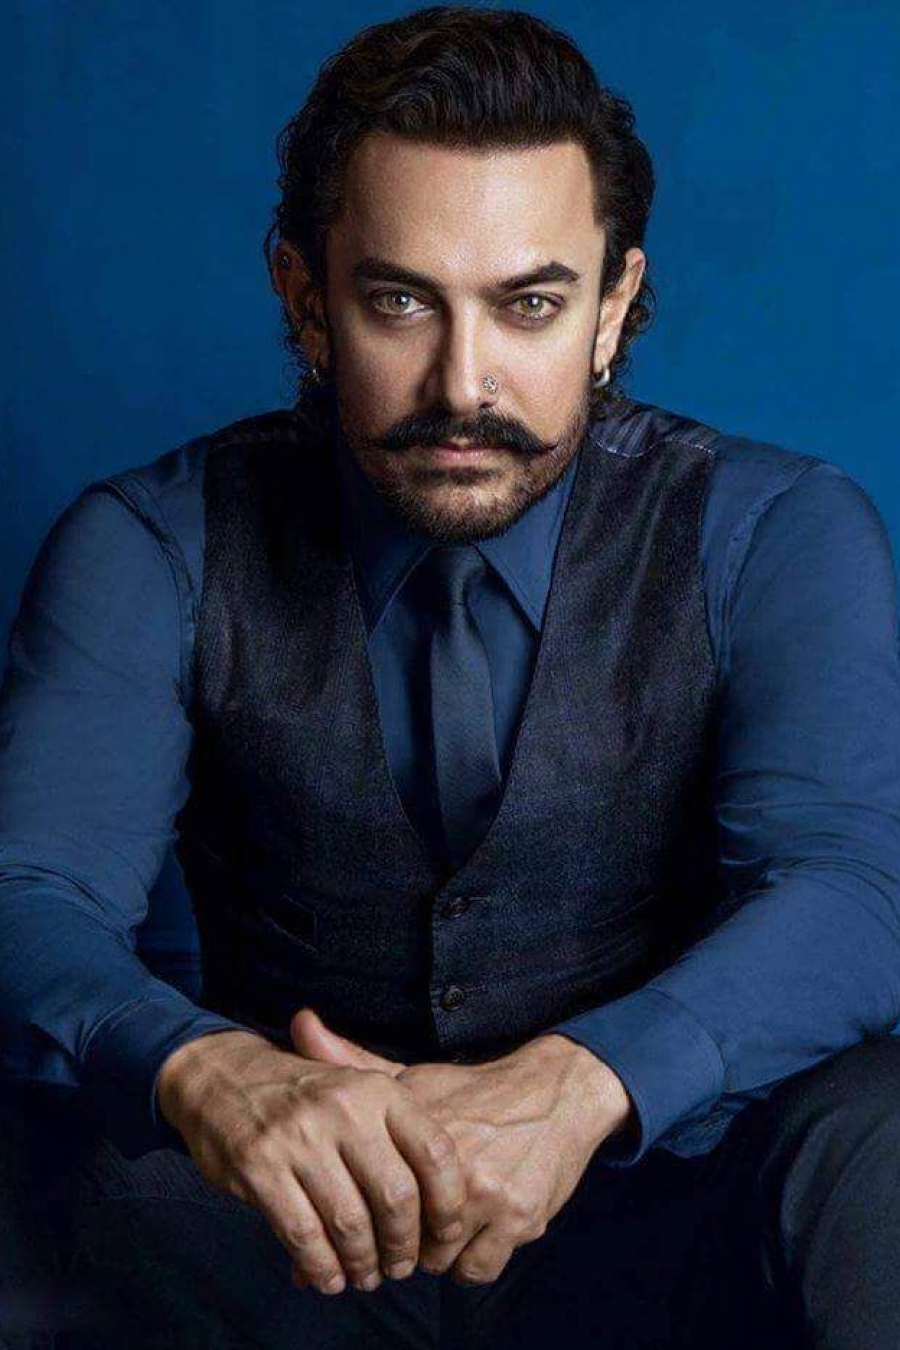  Aamir Khan Turns Life Into A Story, One Film At A Time